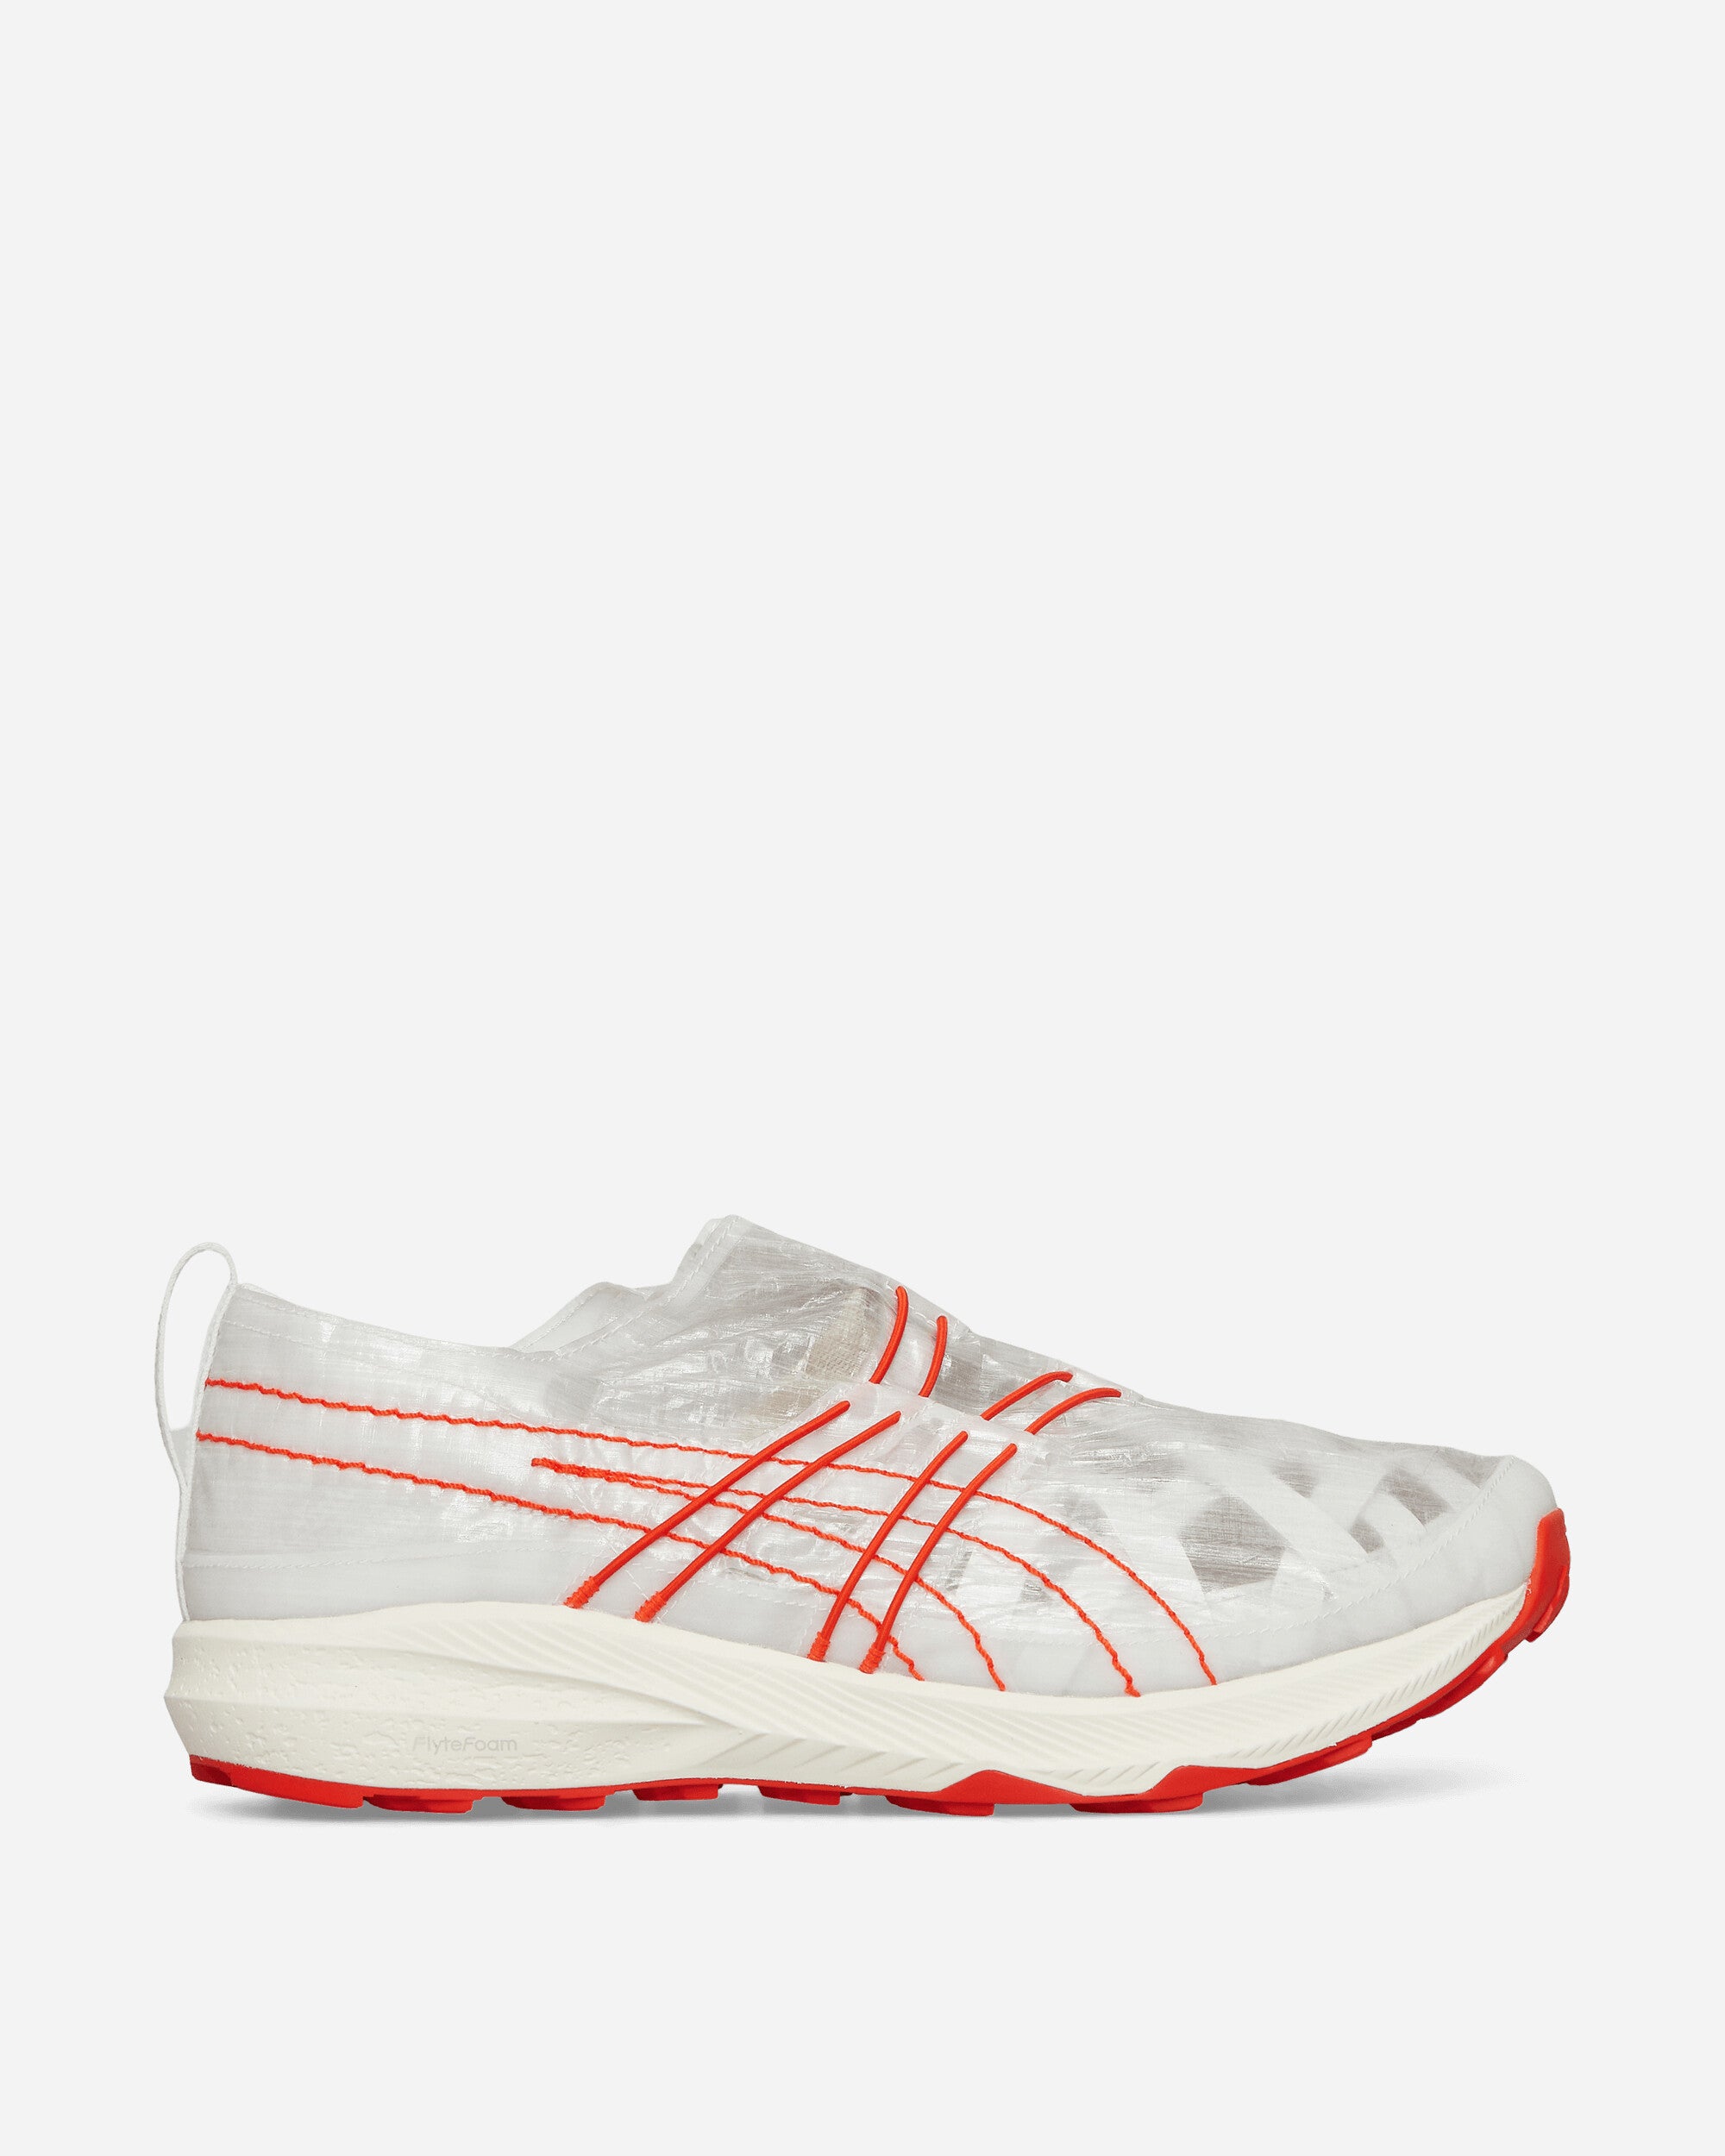 Asics Archisite Oru White/White Sneakers Low 1201A862-101